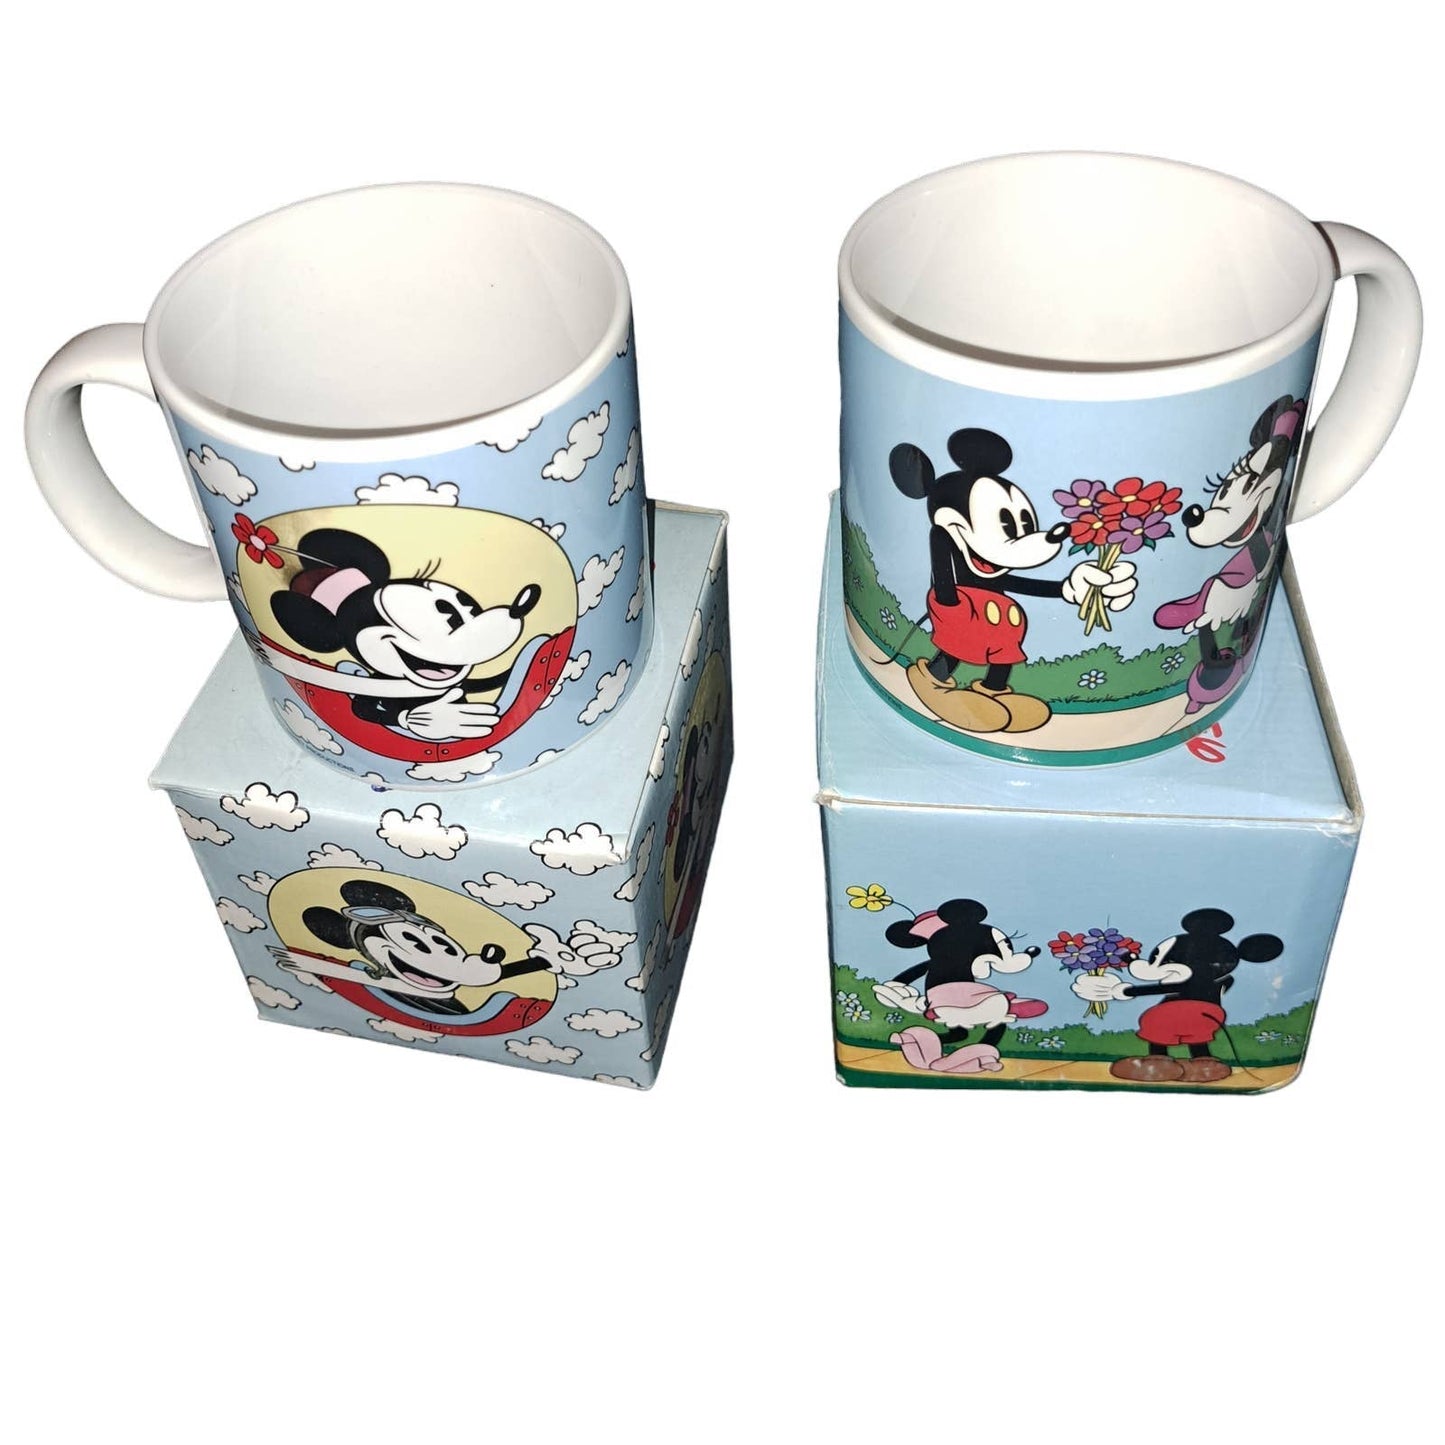 VERY VINTAGE Mickey & Minnie Dating Coffee Cups Circa 1980 NEW in BOXES